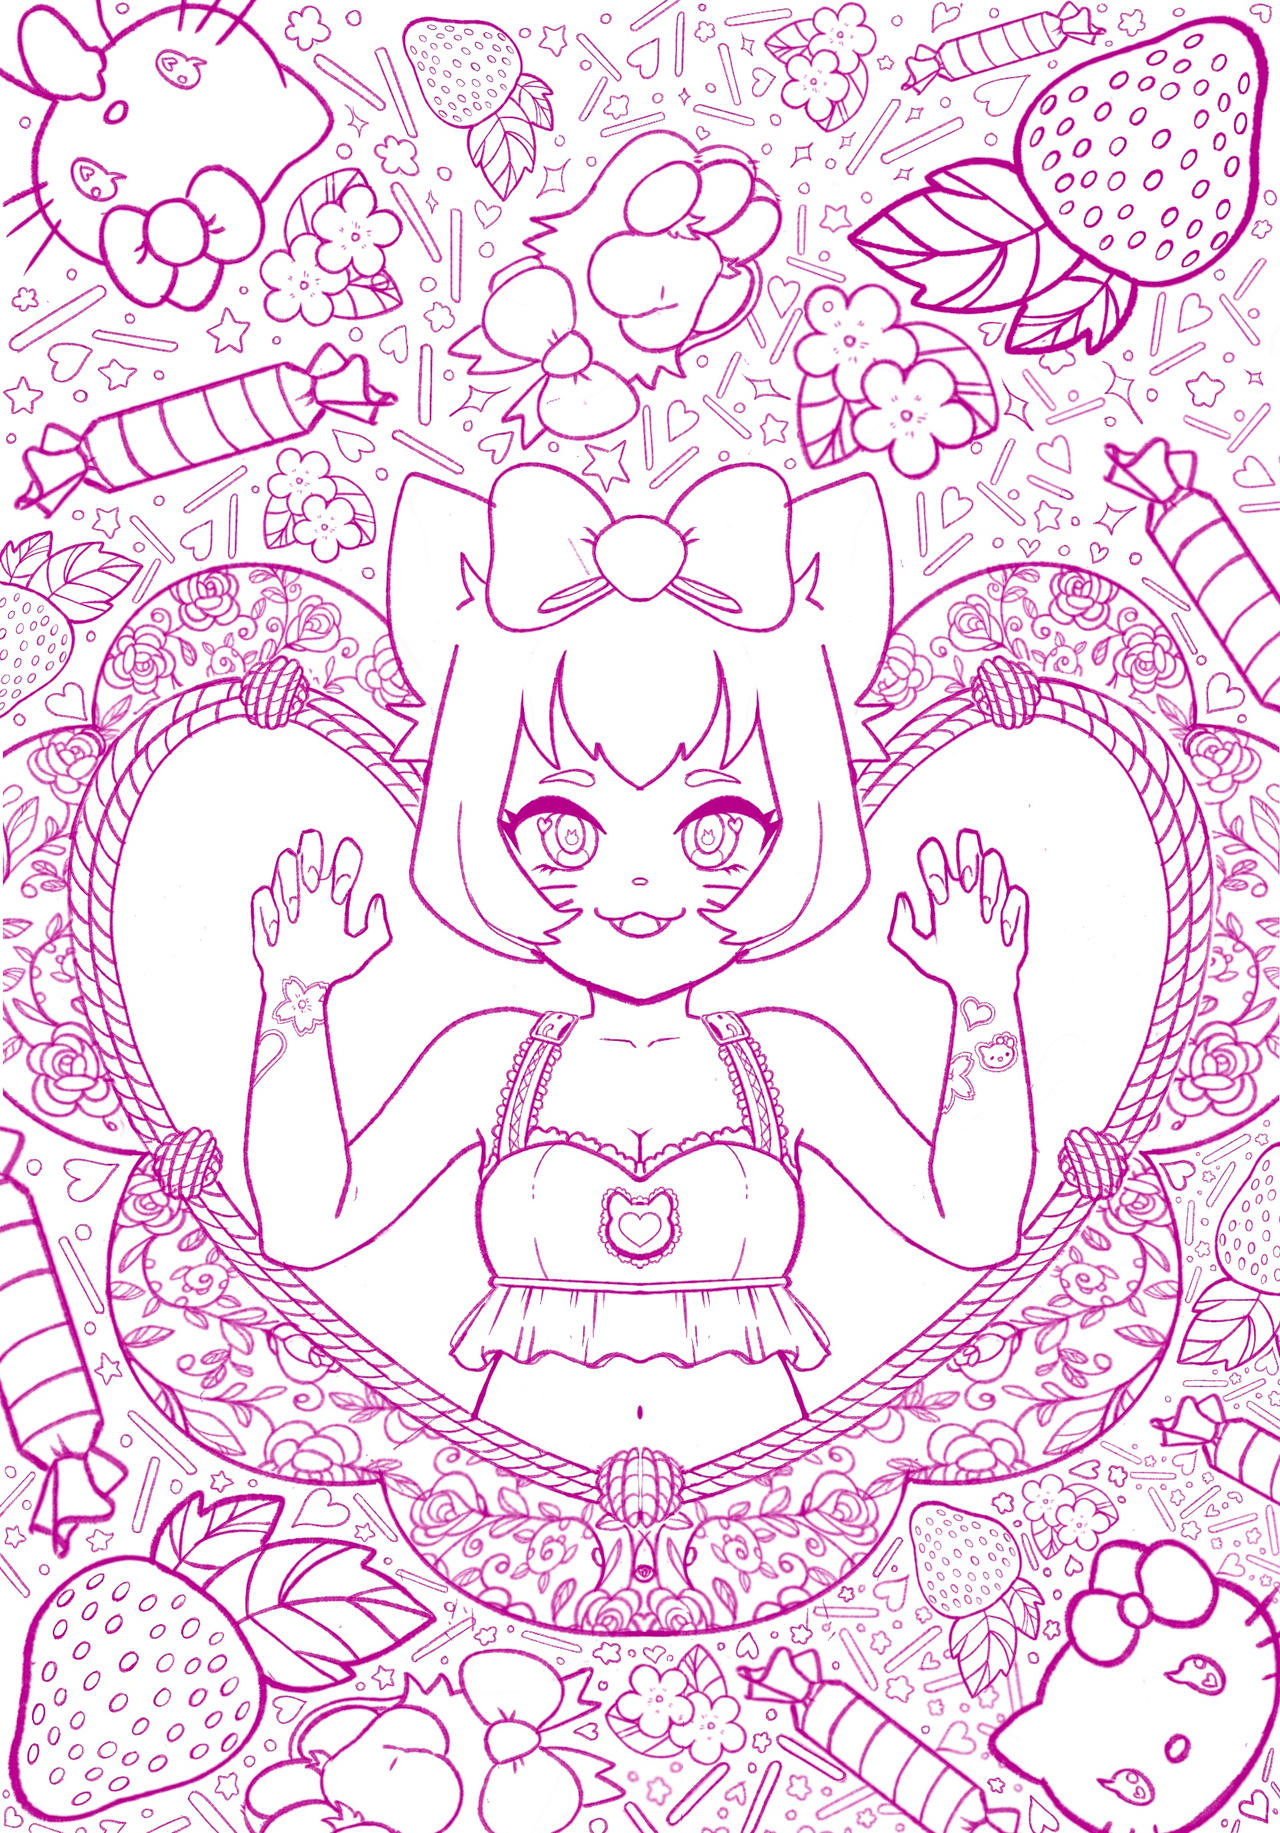 Sanrio coloring pages by pikarawrification on